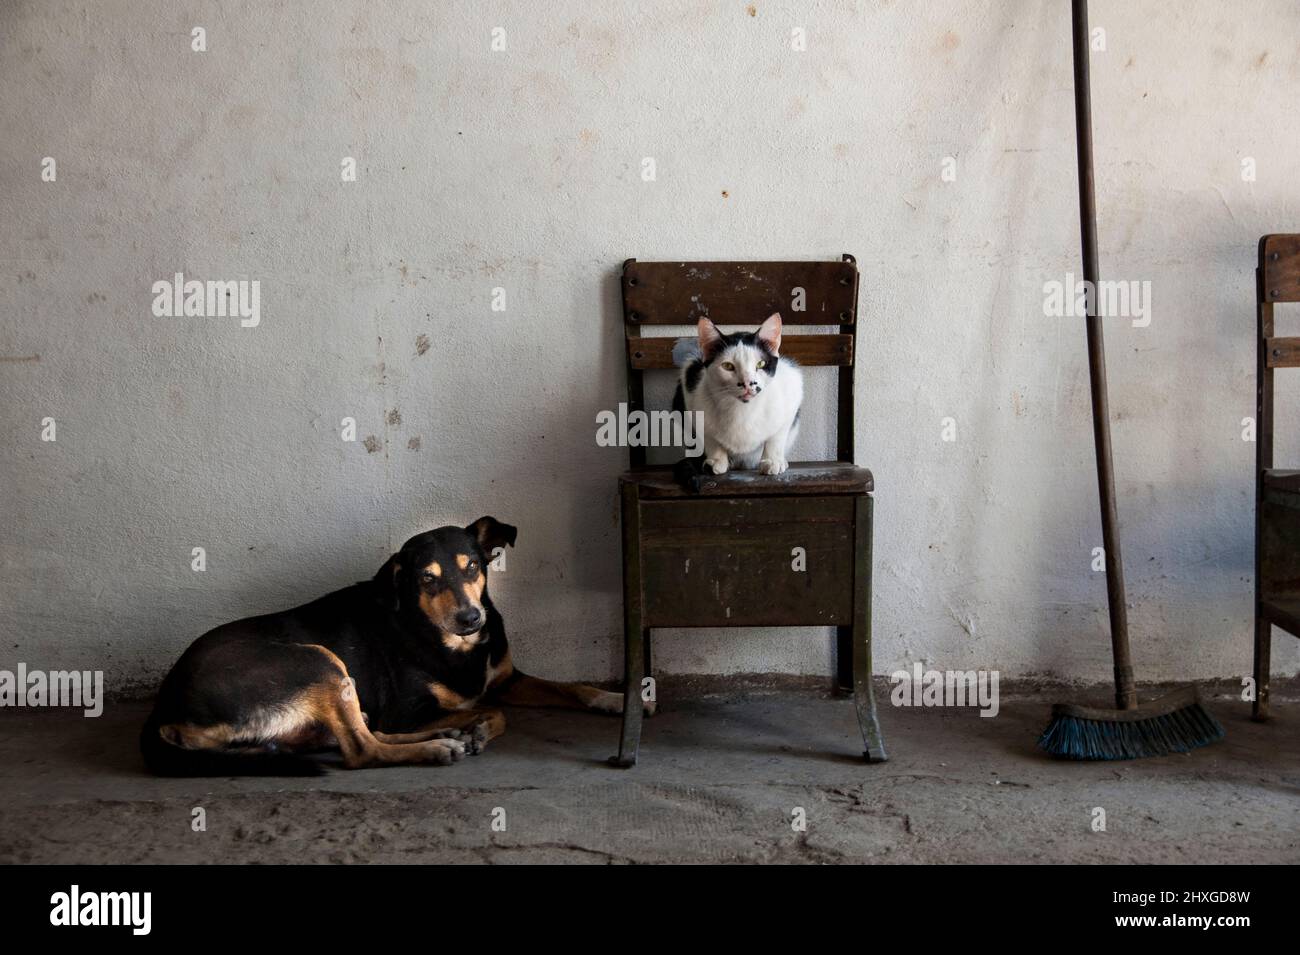 Relaxed dog and cat at home in Havana, Cuba. Stock Photo